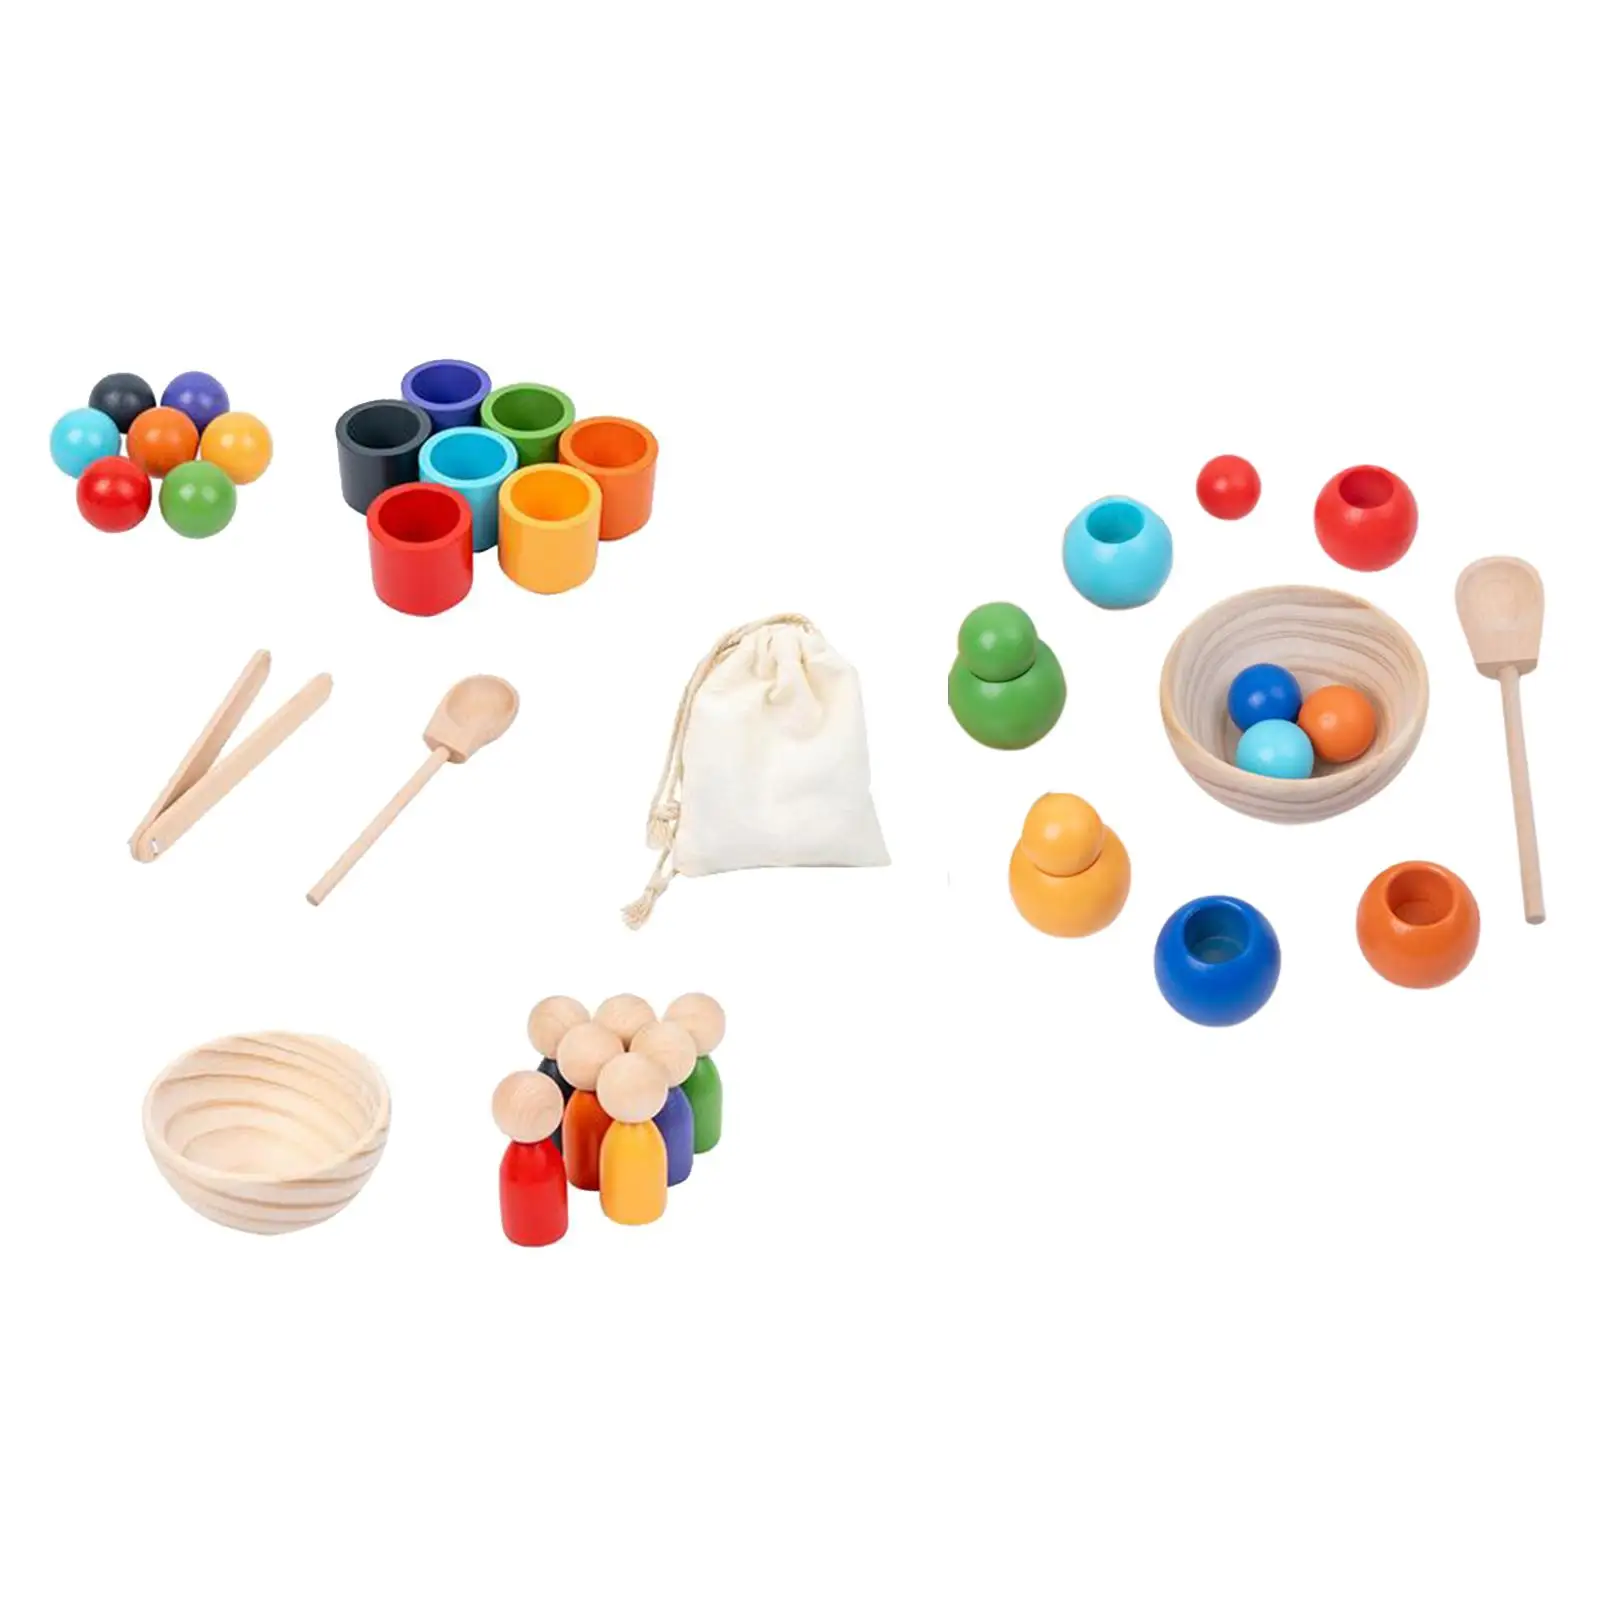 

Rainbow Balls in Cups Montessori Toy for Kids Children Training Logical Thinking Color Sorting Game Early Education Toys